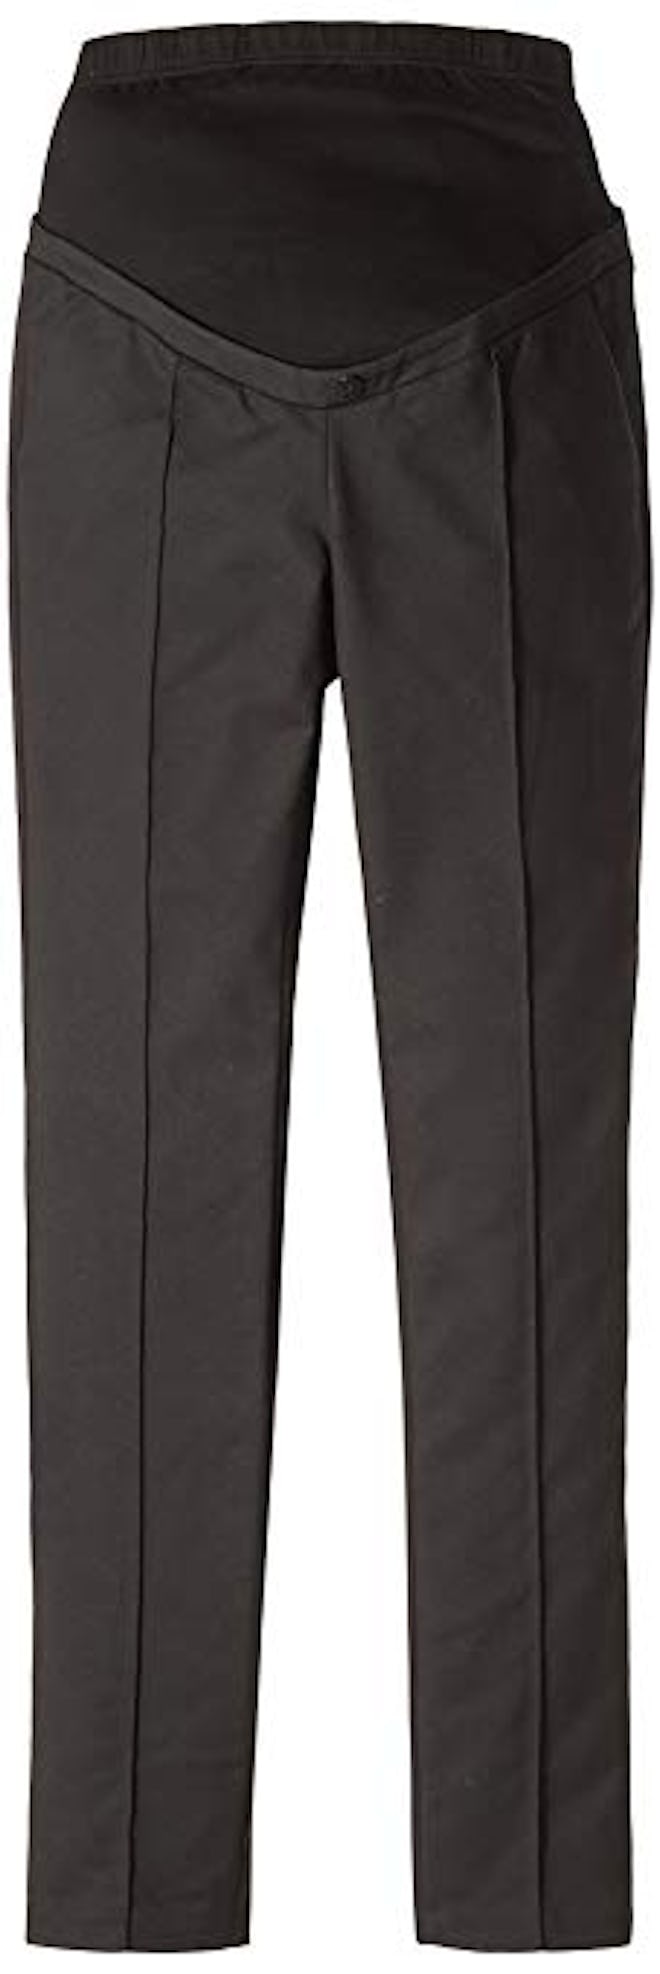 Tailored Black Maternity Trousers